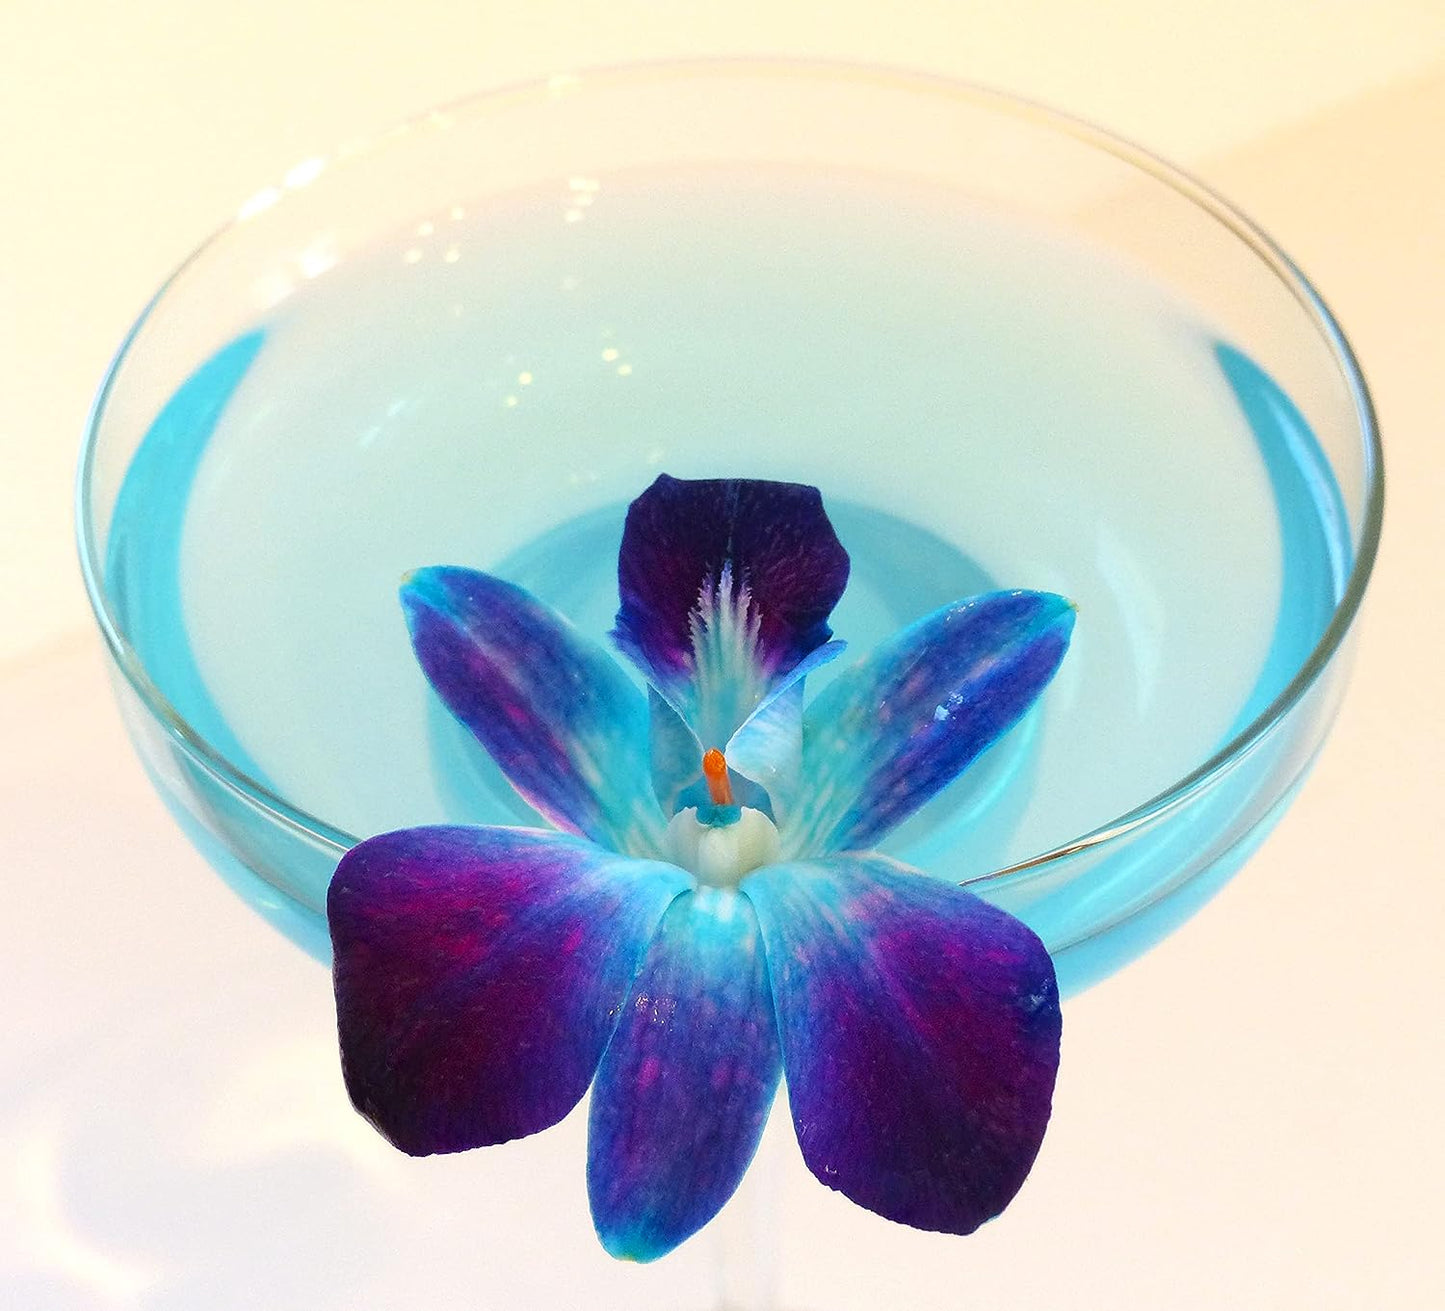 100 Blue Sonia Dyed Fresh Cut Dendrobium Orchid Loose Bloom